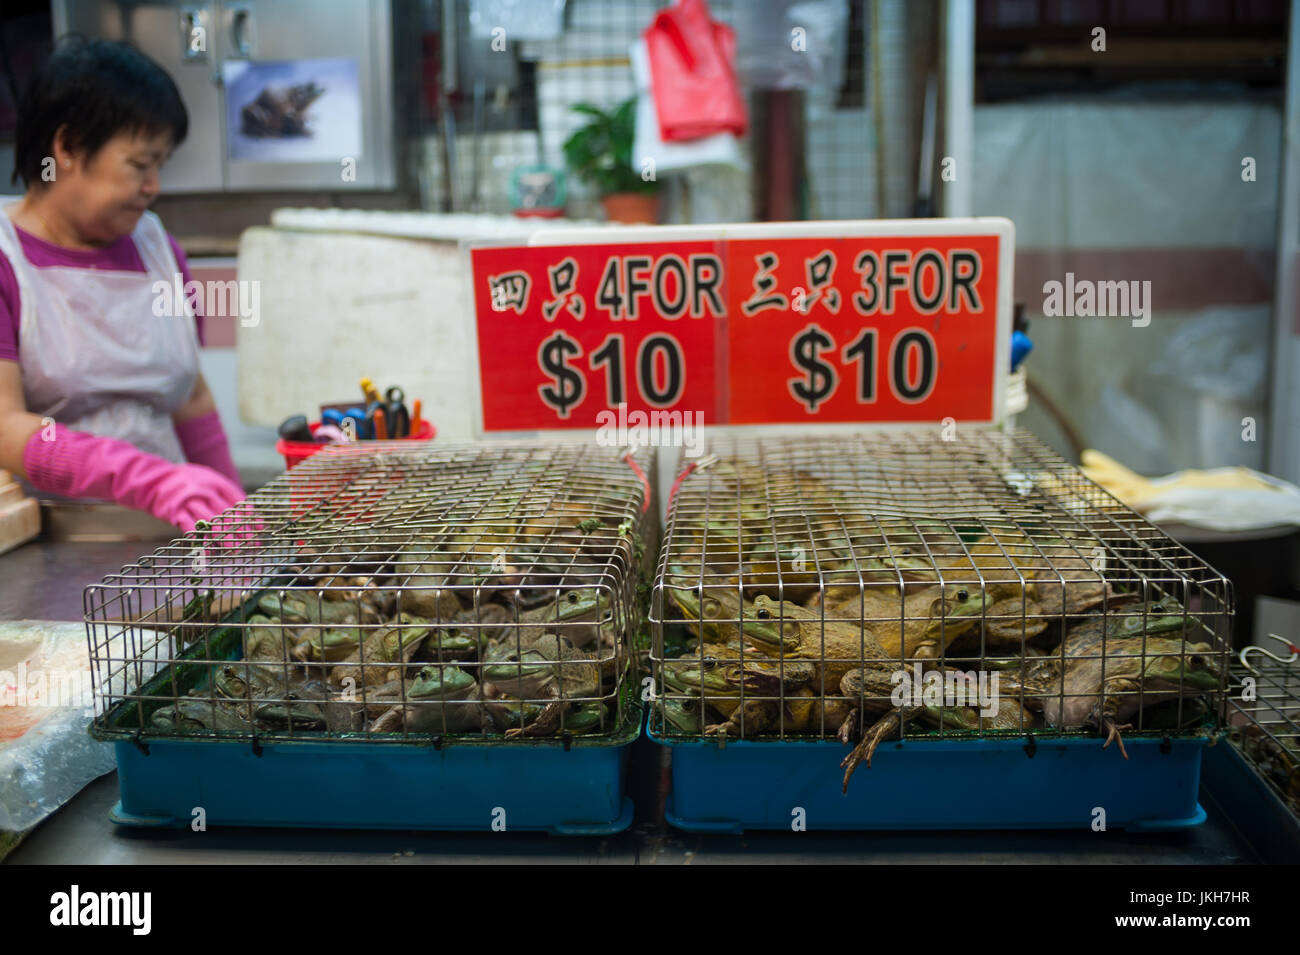 20.07.2017, Singapore, Republic of Singapore, Asia - A monger sells live frogs at a stall in the Chinatown Wet Market. Stock Photo